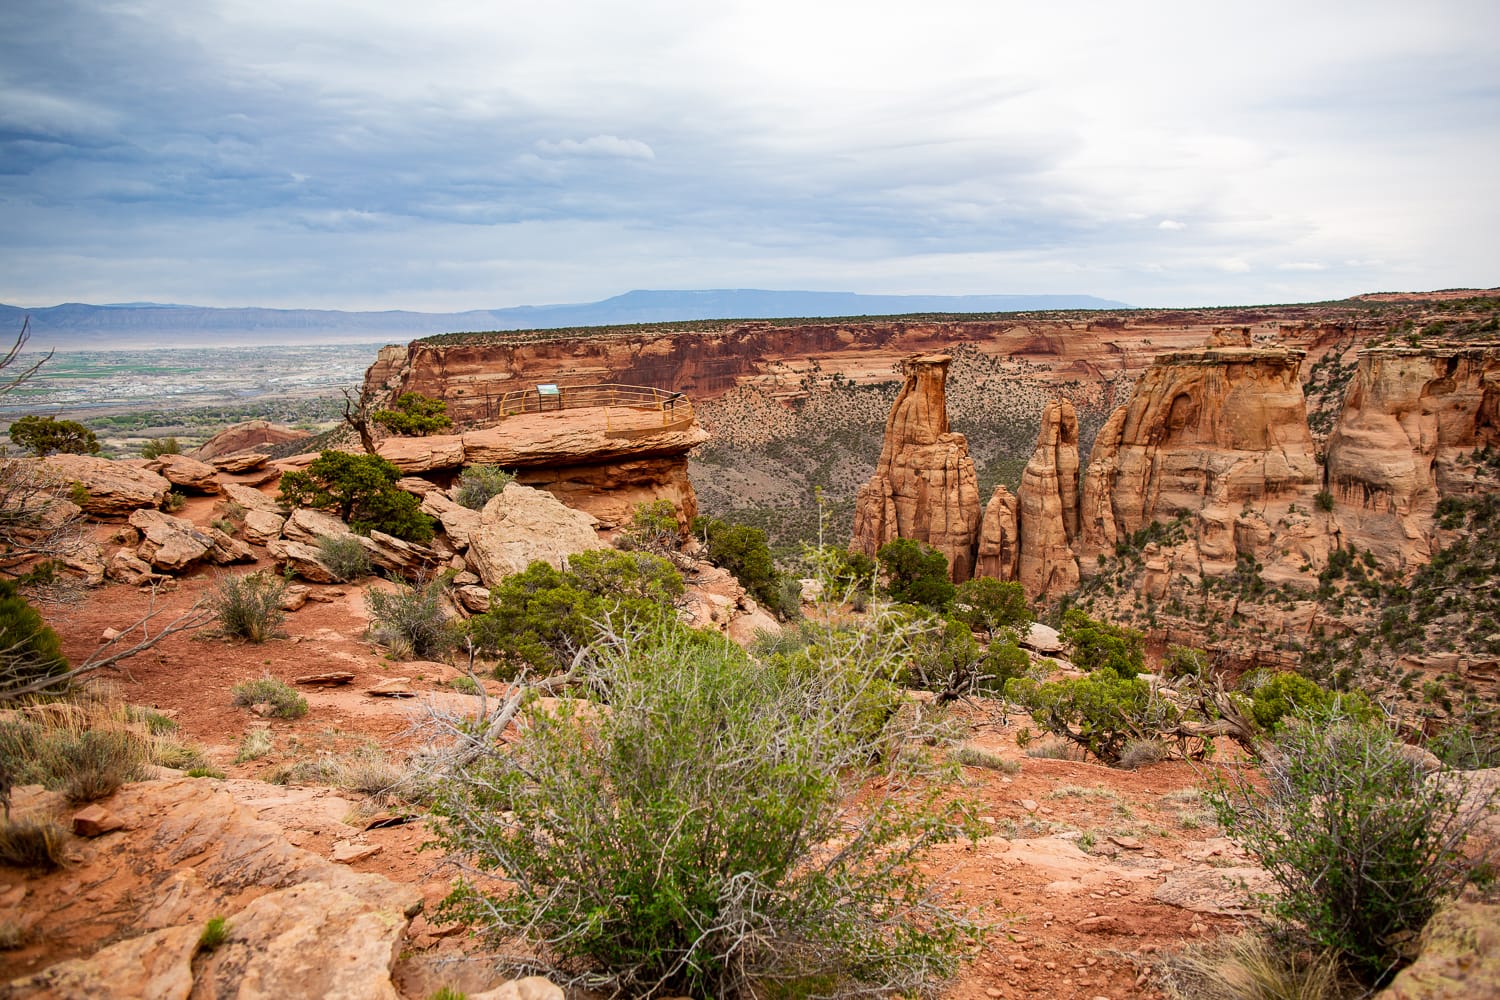 The view of the Colorado National Monument park with its desert brush vegetation, dramatic gulches, rust-colored rock formations.